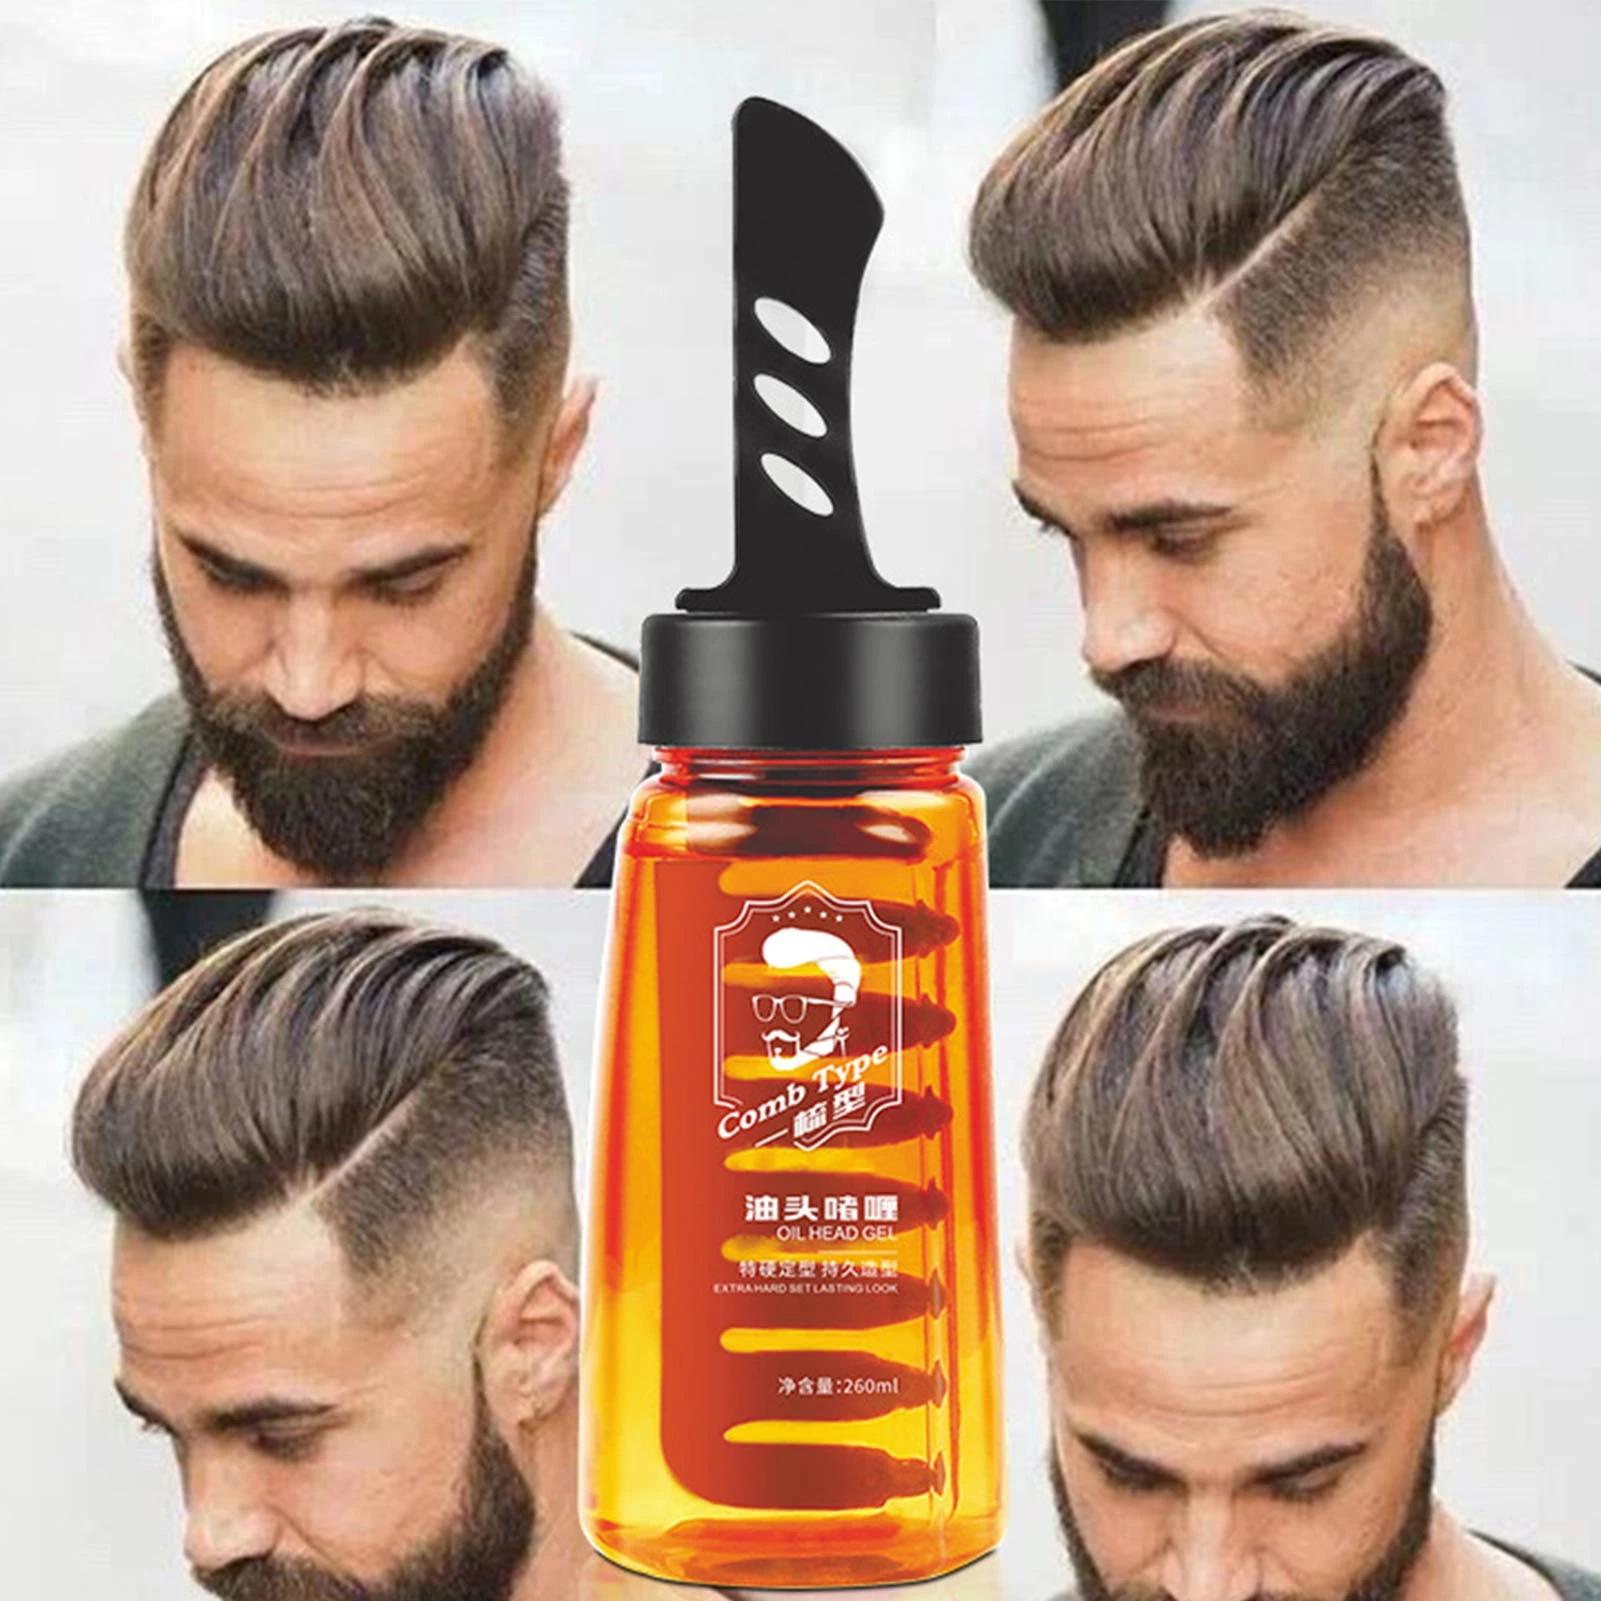 2 In 1 Oil Head Hair Cream With Wide Tooth Comb Back Hair Styling Cream For Men  Hair Styling Gel Hair Wax Styling Fluffy Comb - Hair Styling Waxes & Cream  - AliExpress